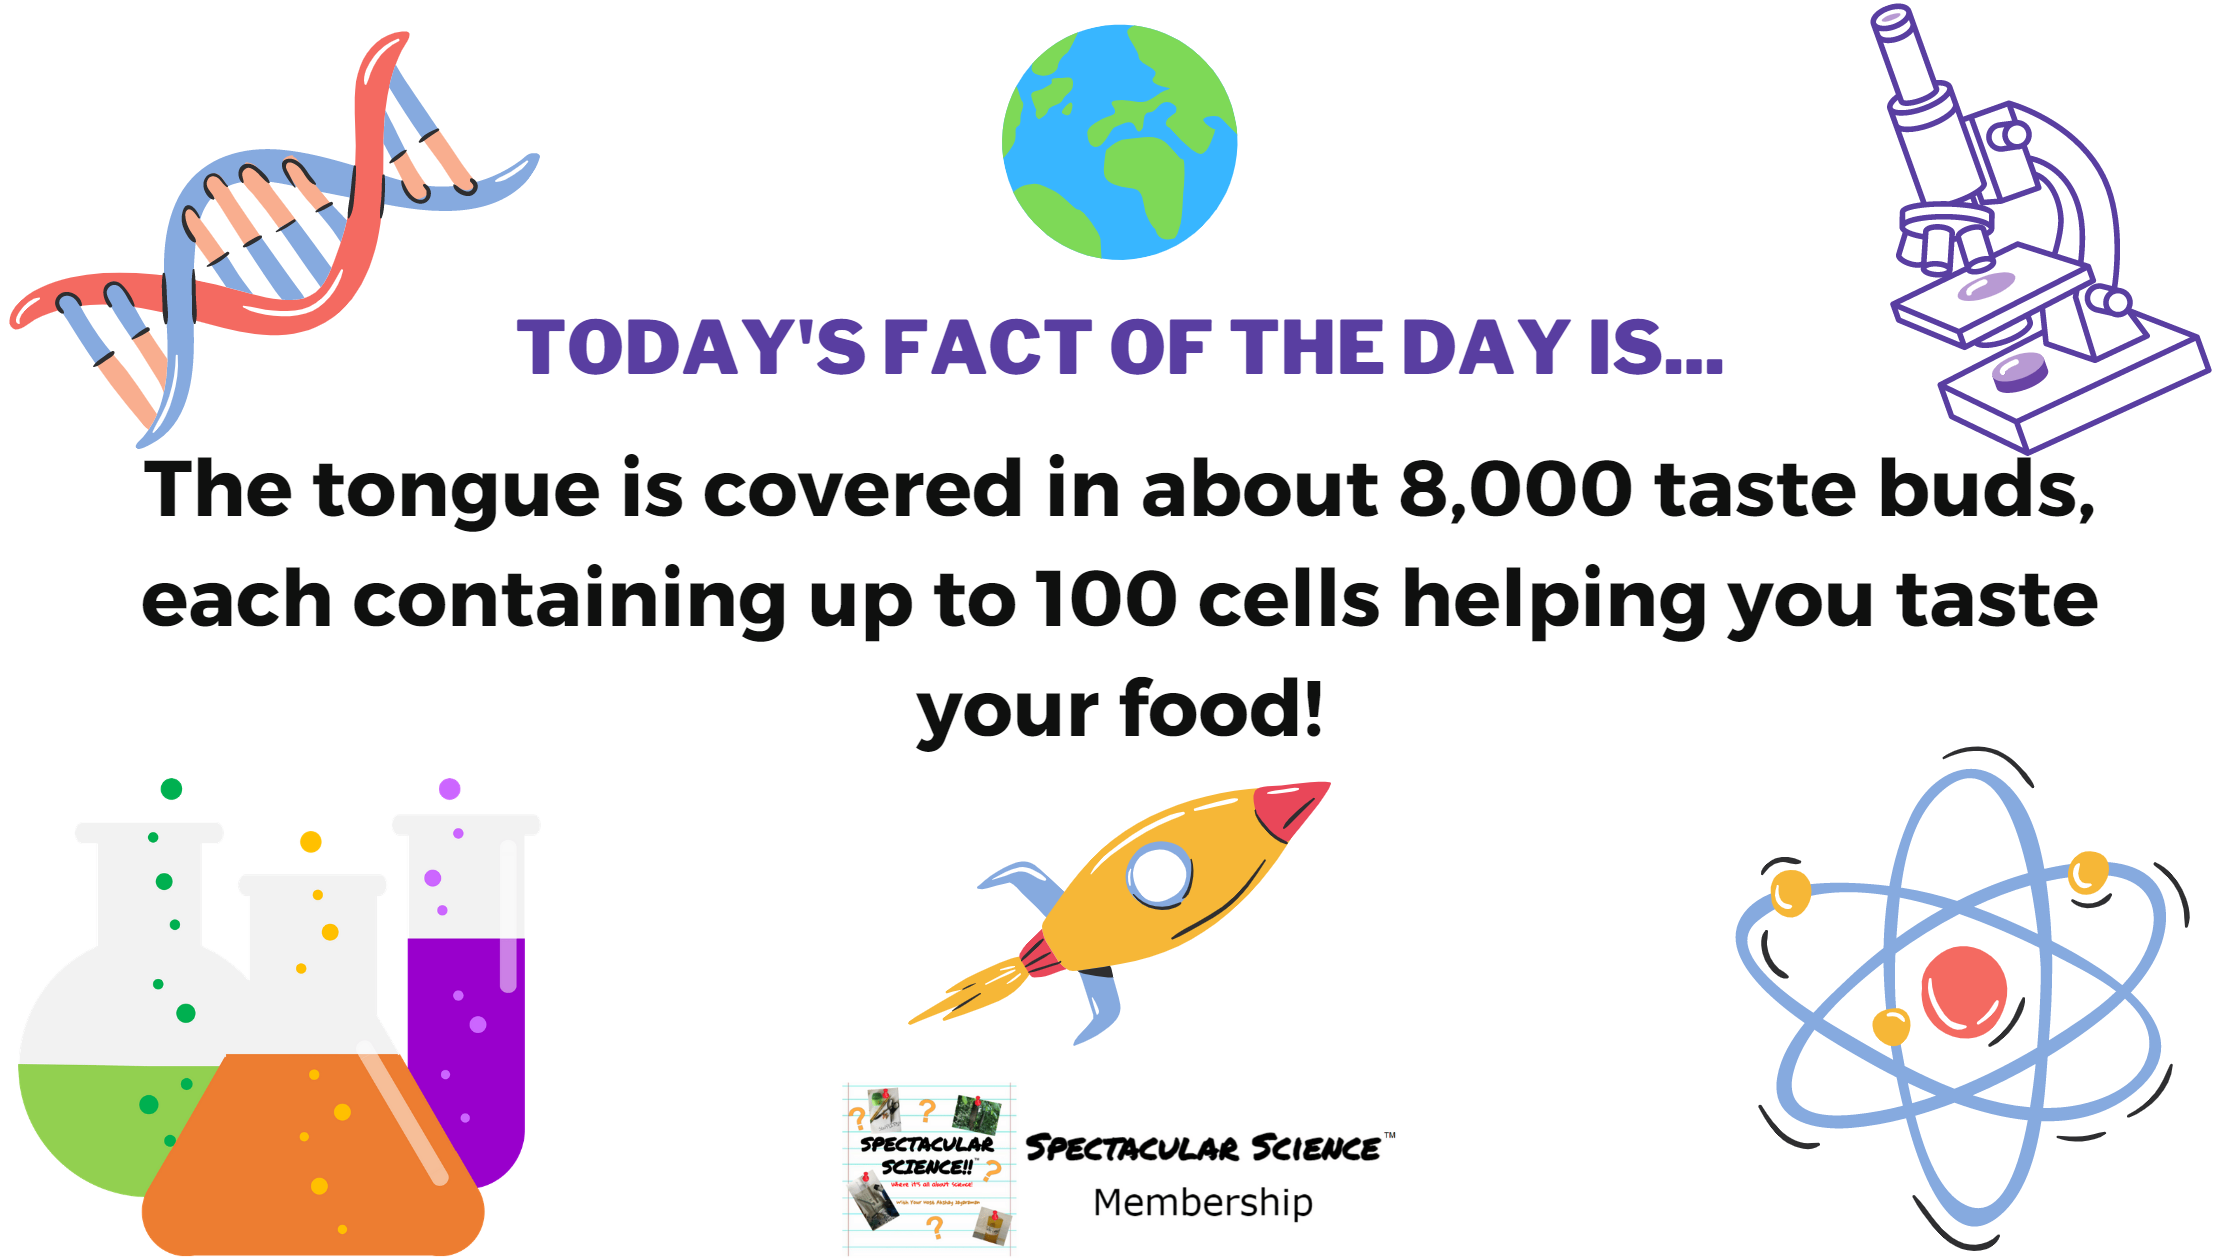 Fact of the Day Image February 20th